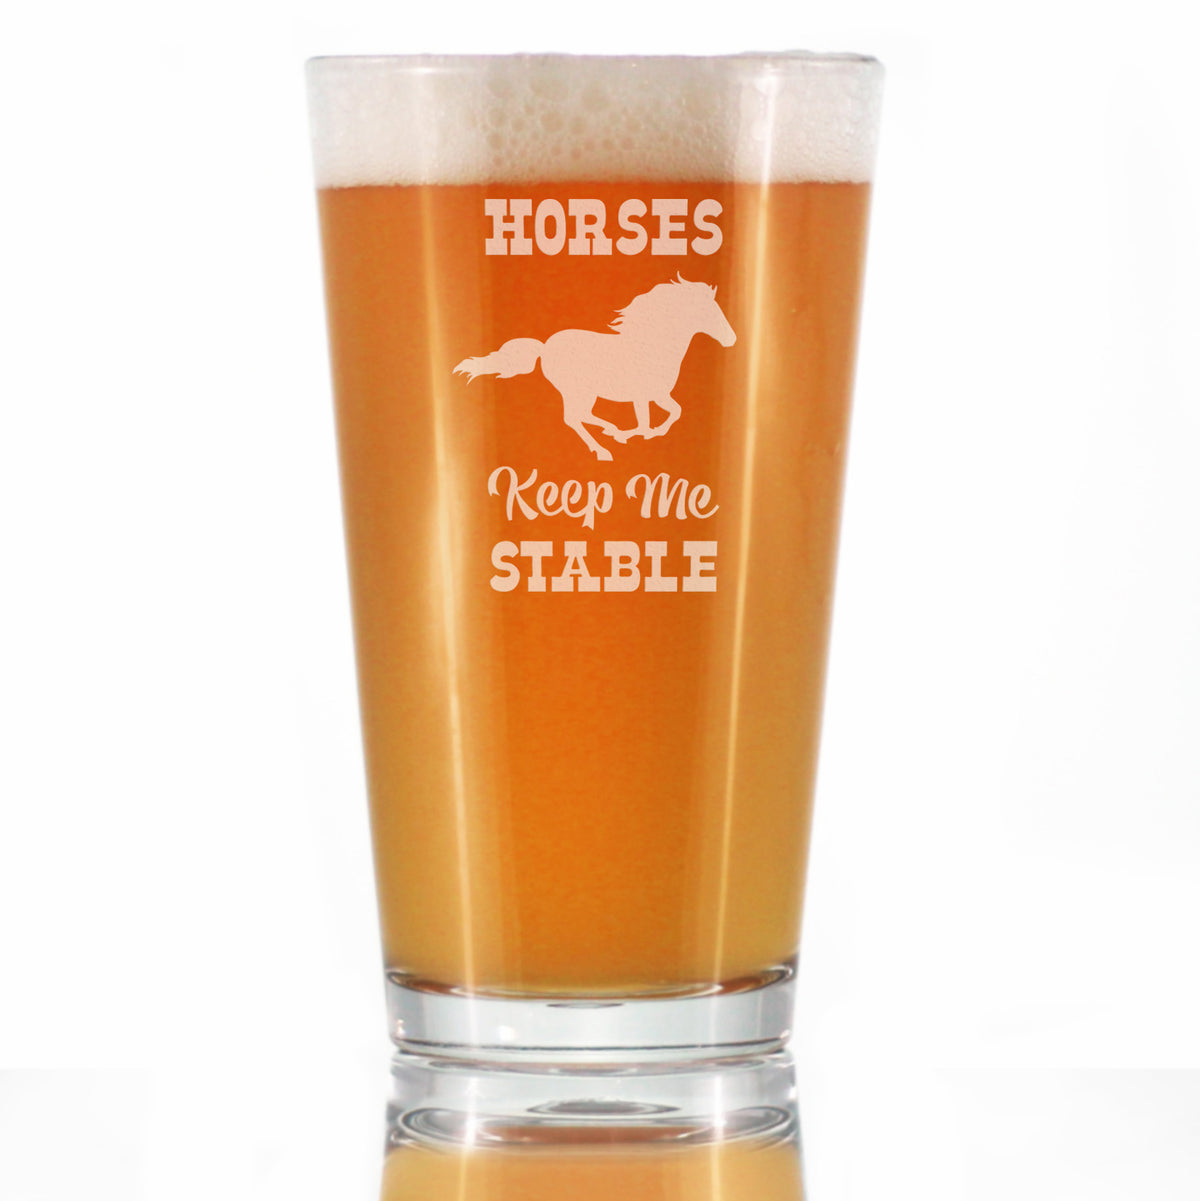 Horses Keep Me Stable - Funny Horse Pint Glass Gifts for Beer Drinking Men &amp; Women - Fun Unique Equestrian Decor